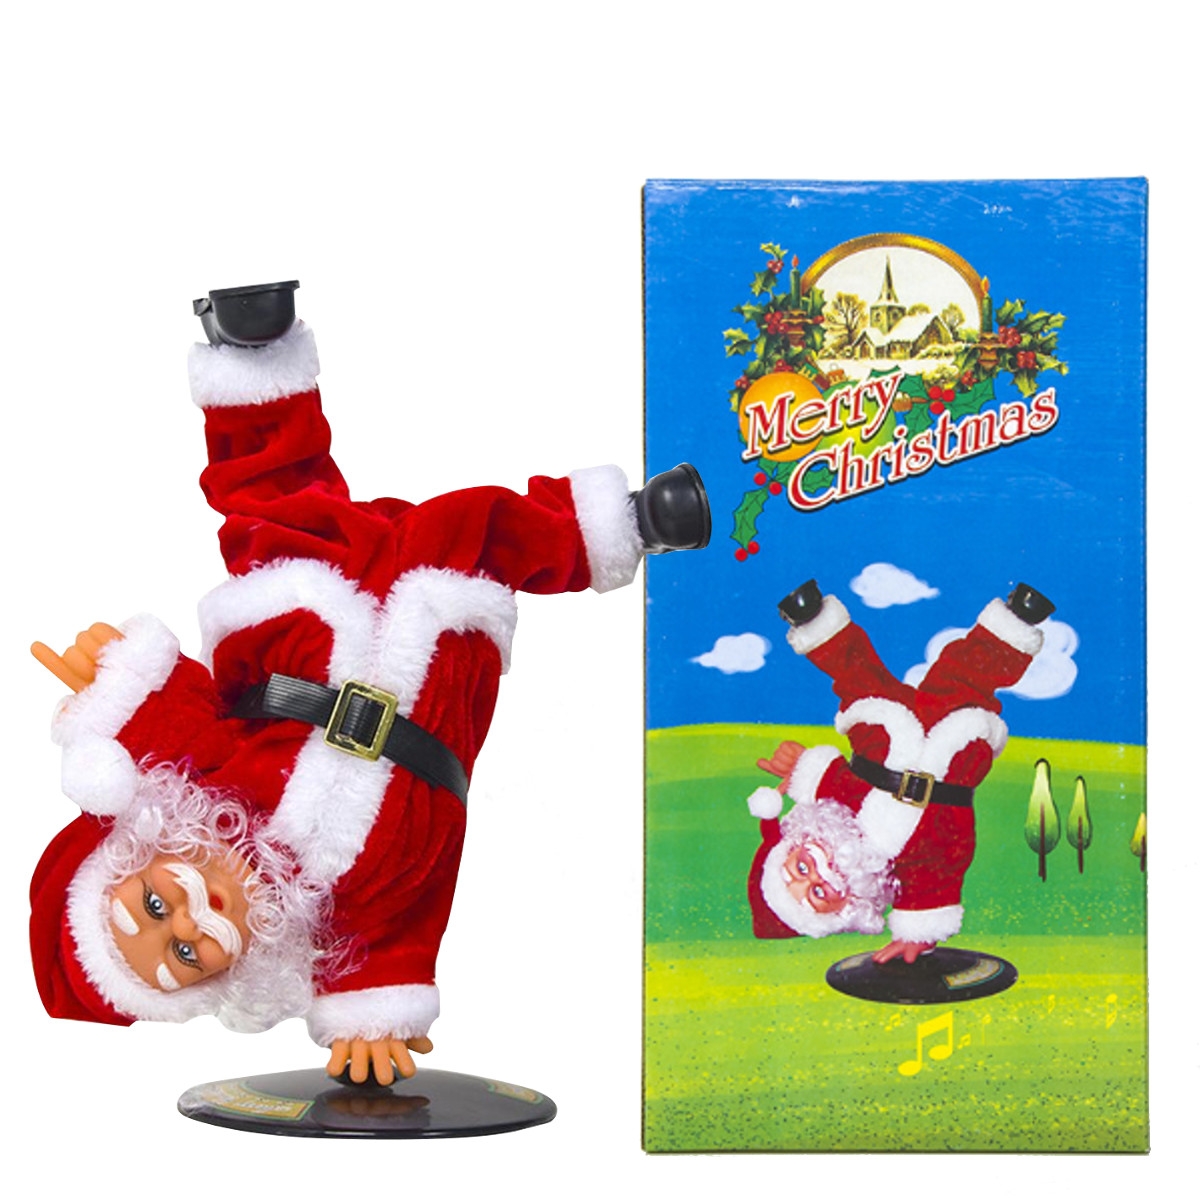 Xmas Ornaments Electronic Musical Dance Santa Claus Doll Christmas Decoration Action Figure Model Toy